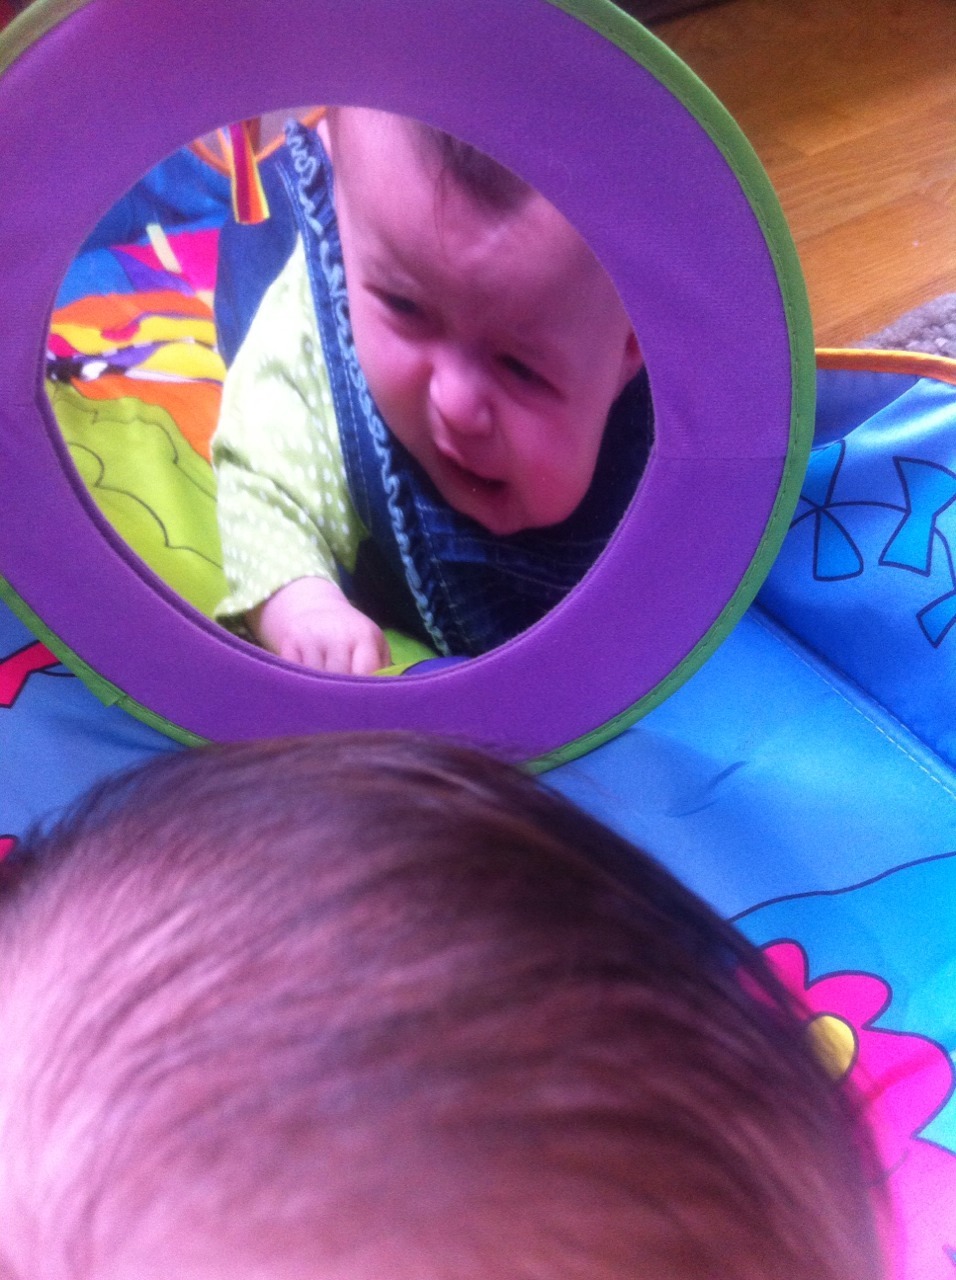 "She saw her reflection."</p>
<p>Submitted By: Kate L.<br />
Location: London, UK